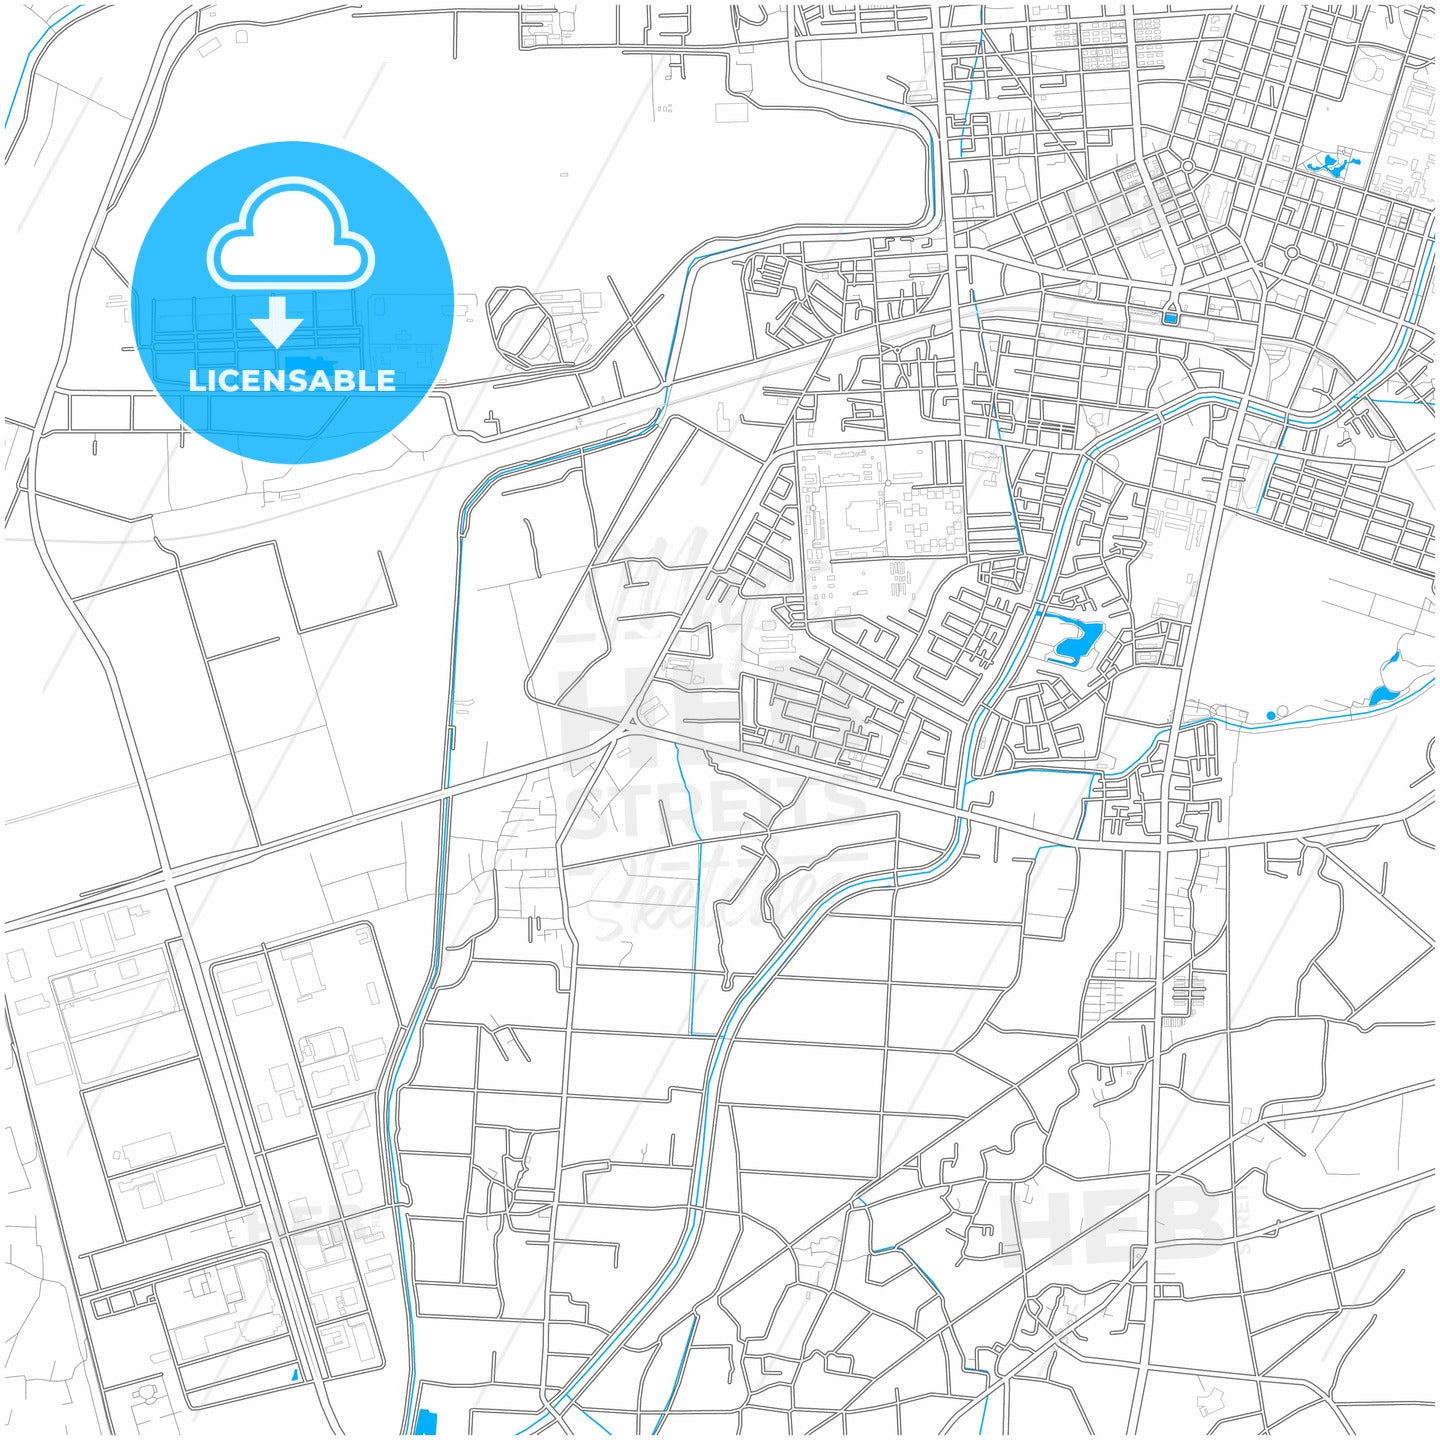 Pingtung, Pingtung, Taiwan, city map with high quality roads.